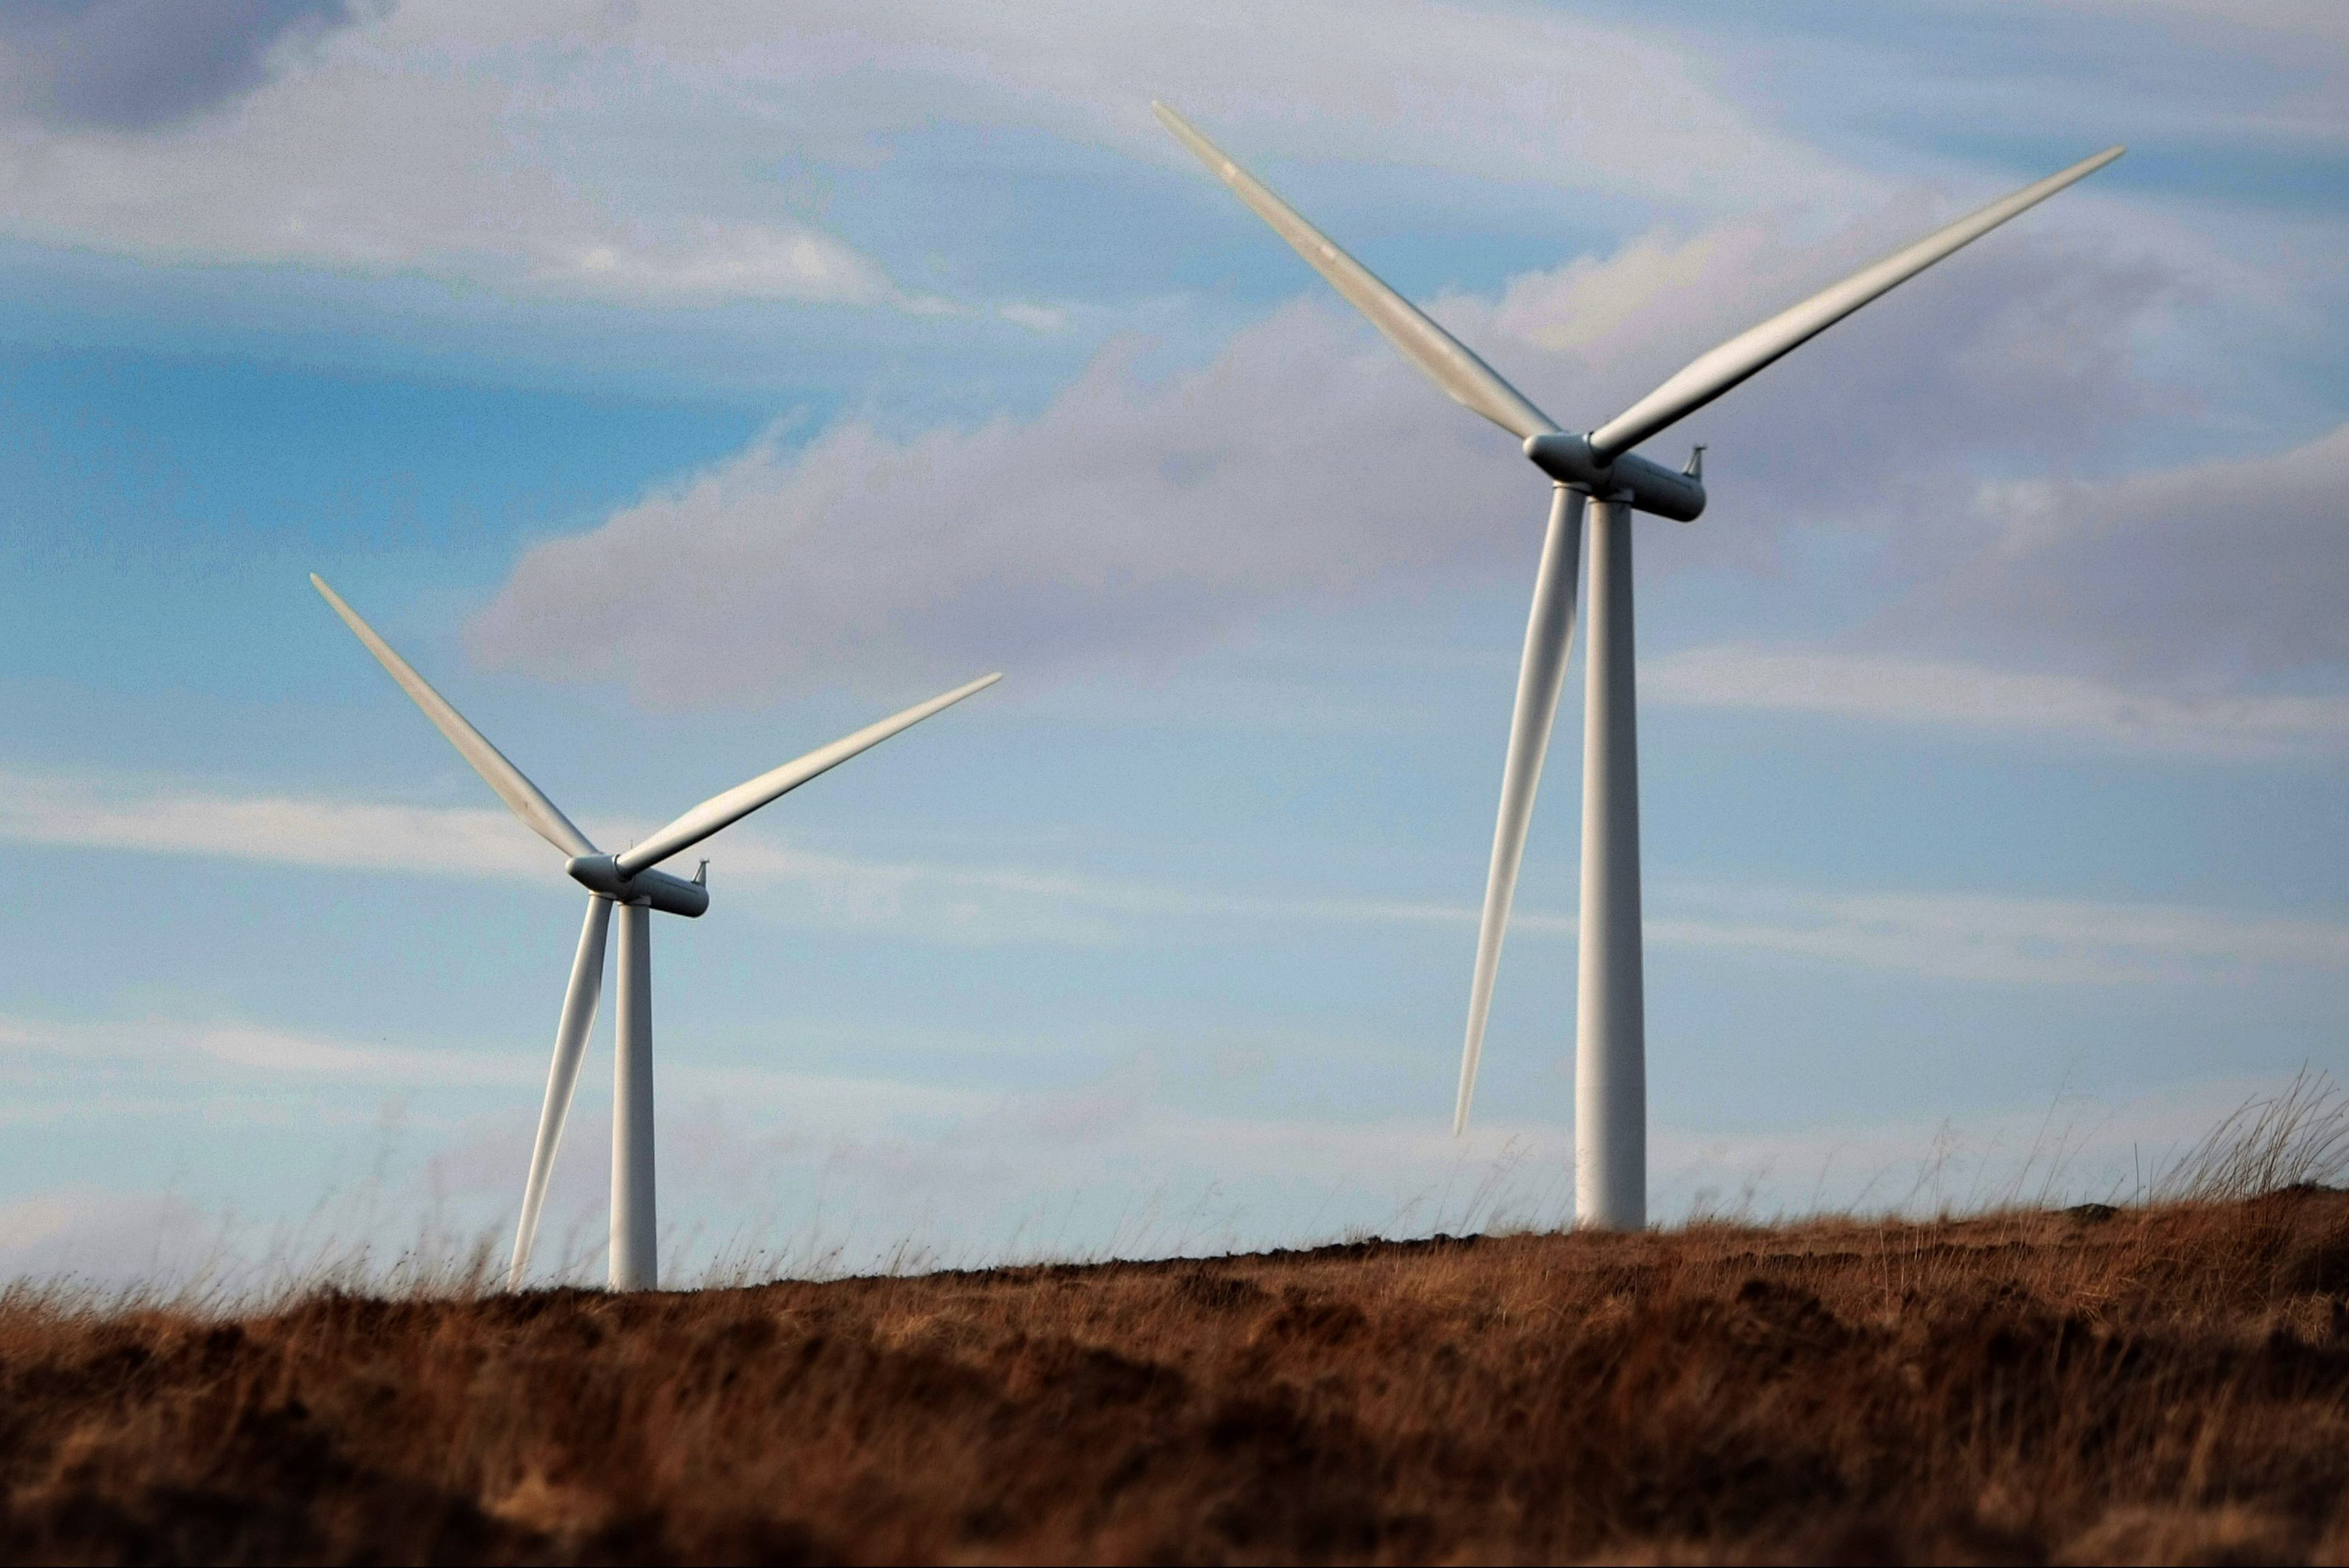 Drumderg wind farm which is adjacent to the site of the Green Burn proposal.